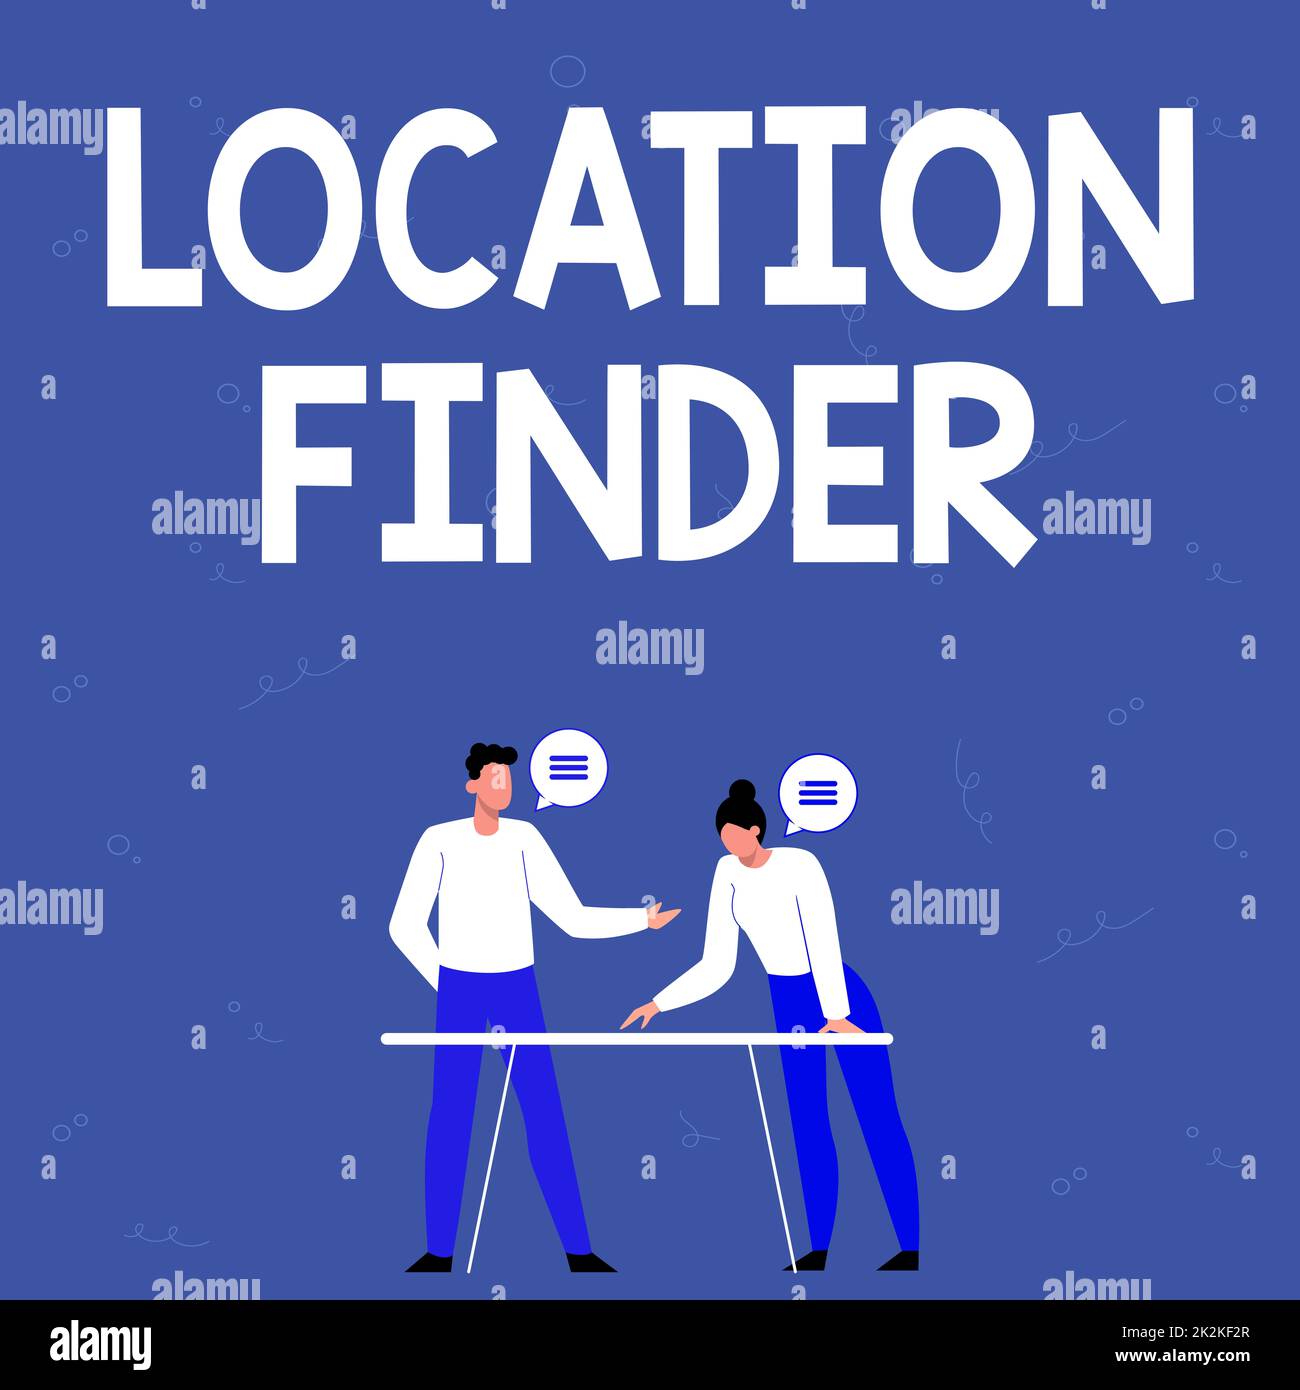 Sign displaying Location Finder. Word Written on A service featured to find the address of a selected place Partners Sharing New Ideas For Skill Improvement Work Strategies. Stock Photo